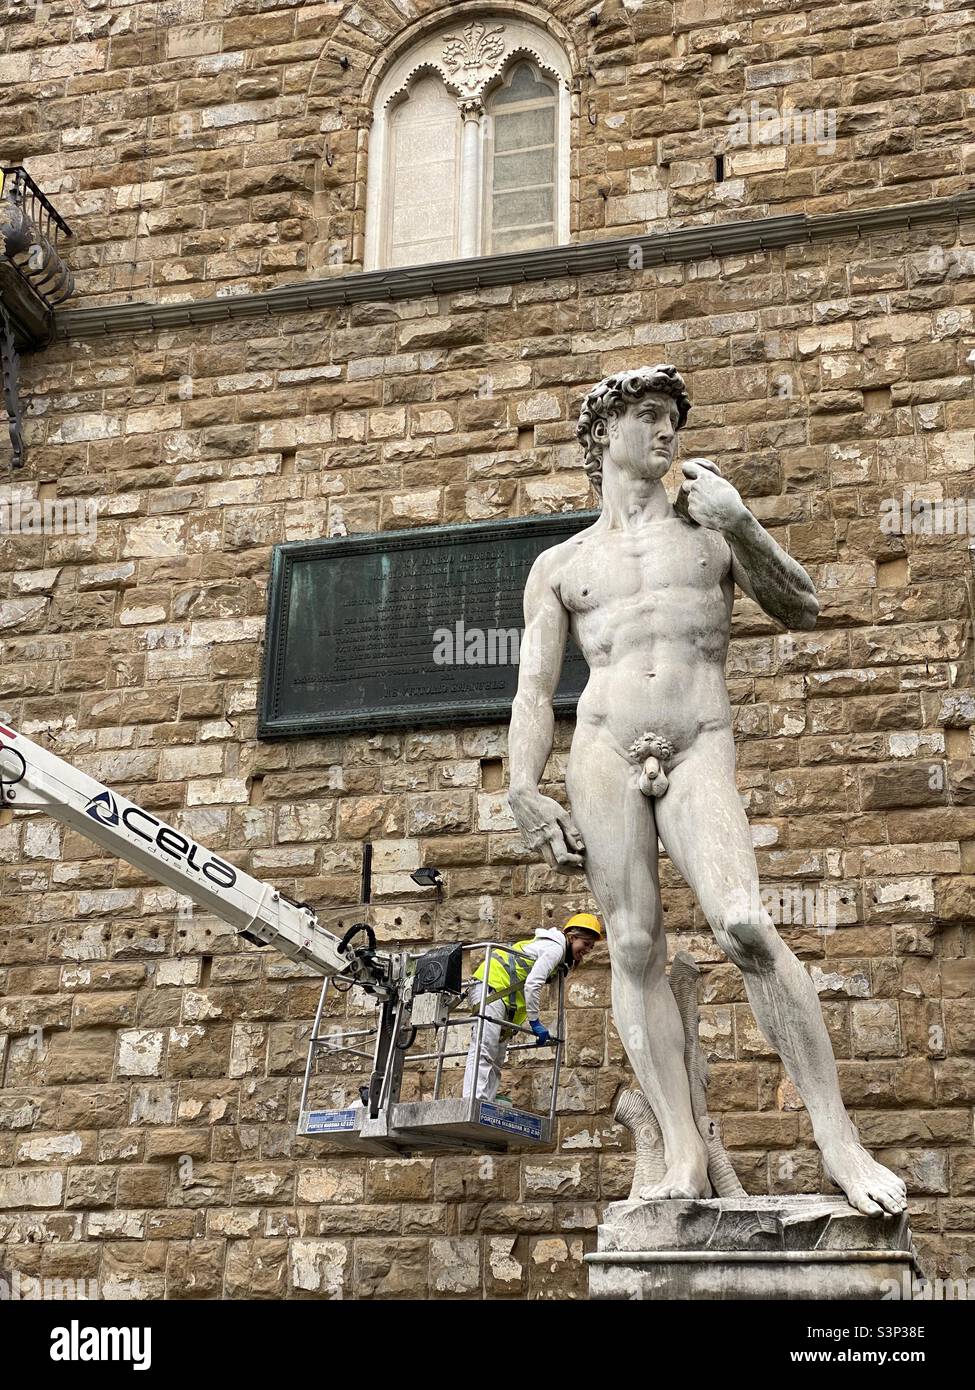 16.03 2022 Florence Italy Worker in a crane cleaning the sculpture of David outside piazza della  signoria in Florence Italy Stock Photo